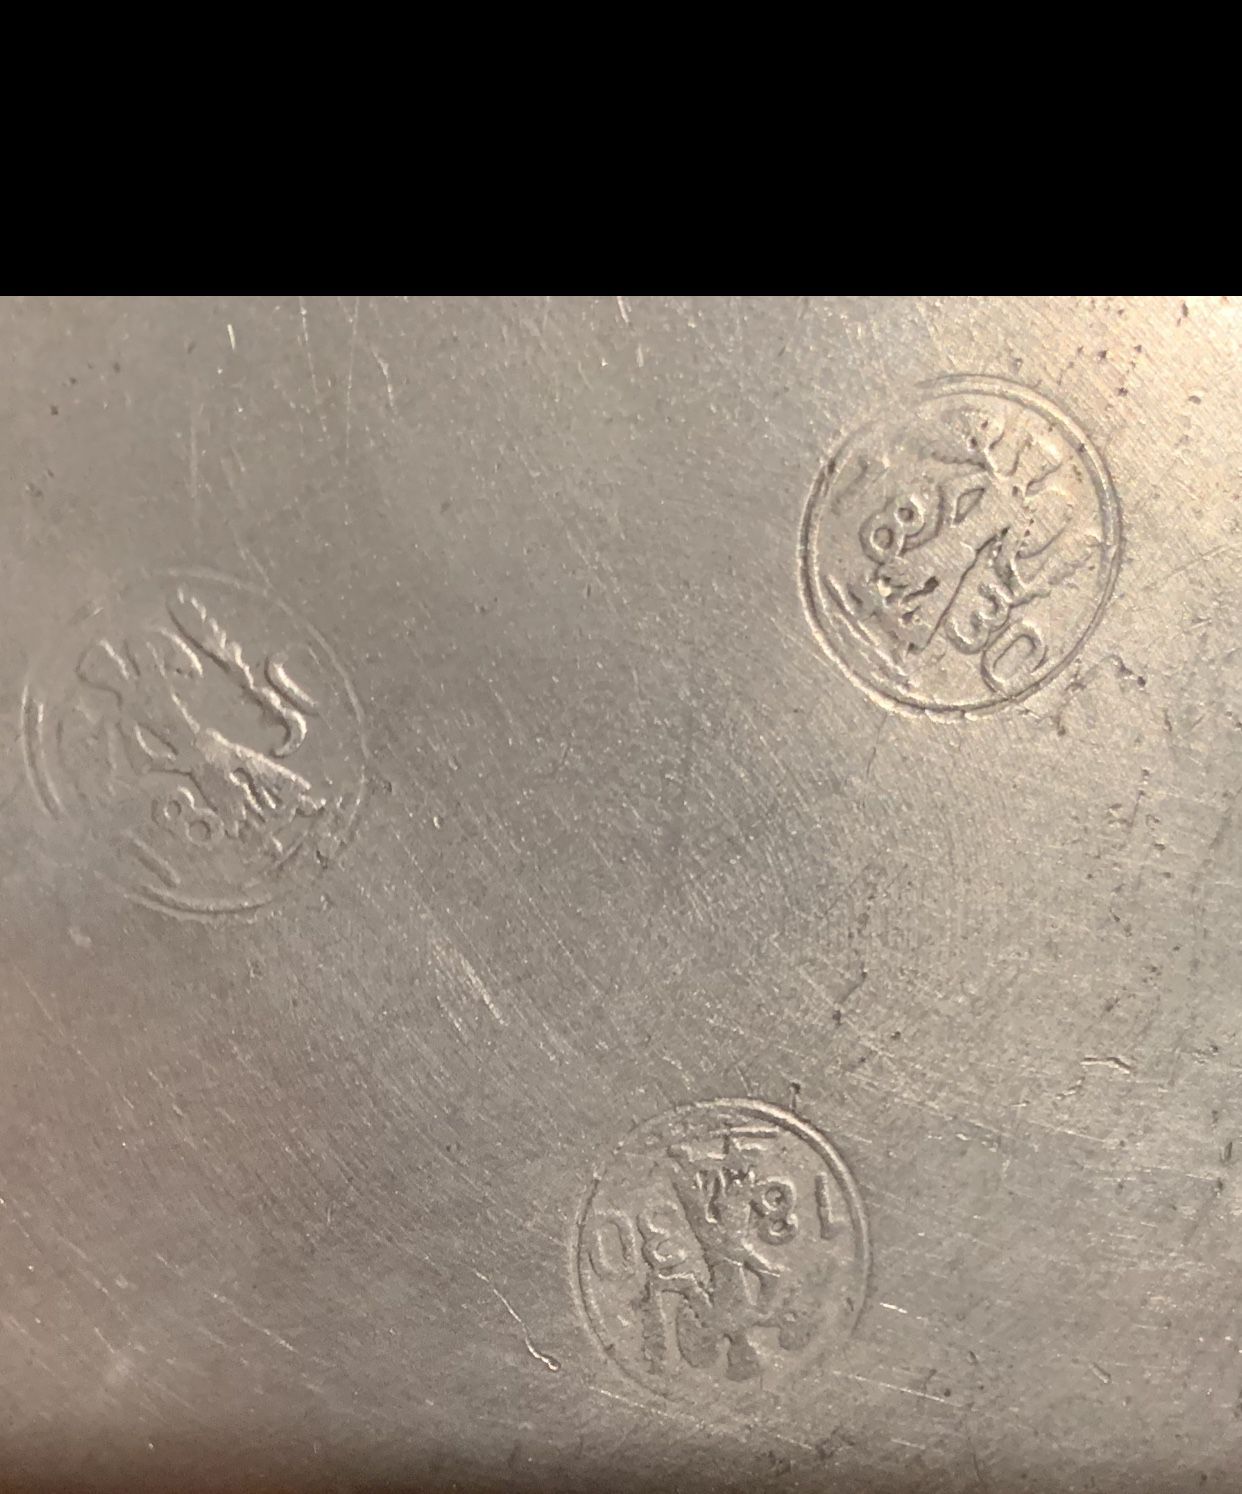 Solid Pewter Plates